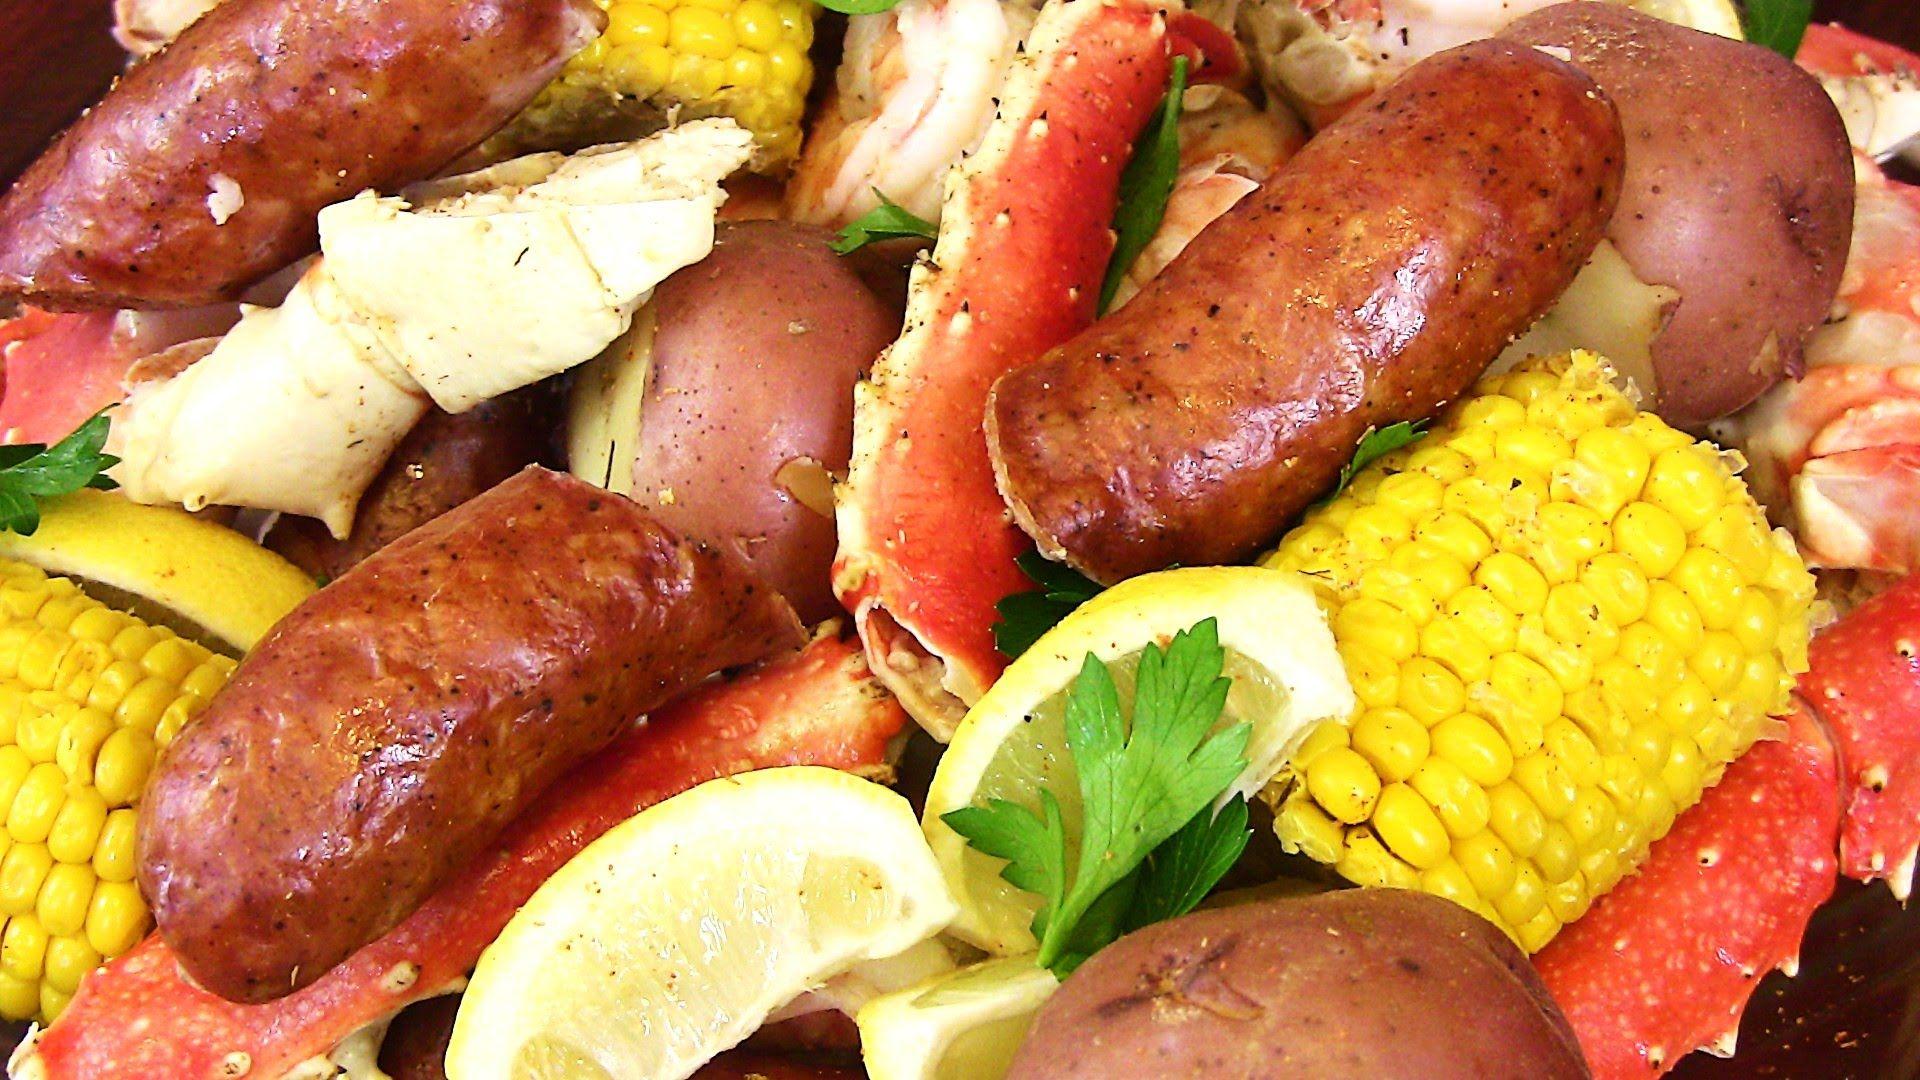 Seafood Boil! Crab, Sausage, Shrimp & Potatoes Oh My!. Cooking With